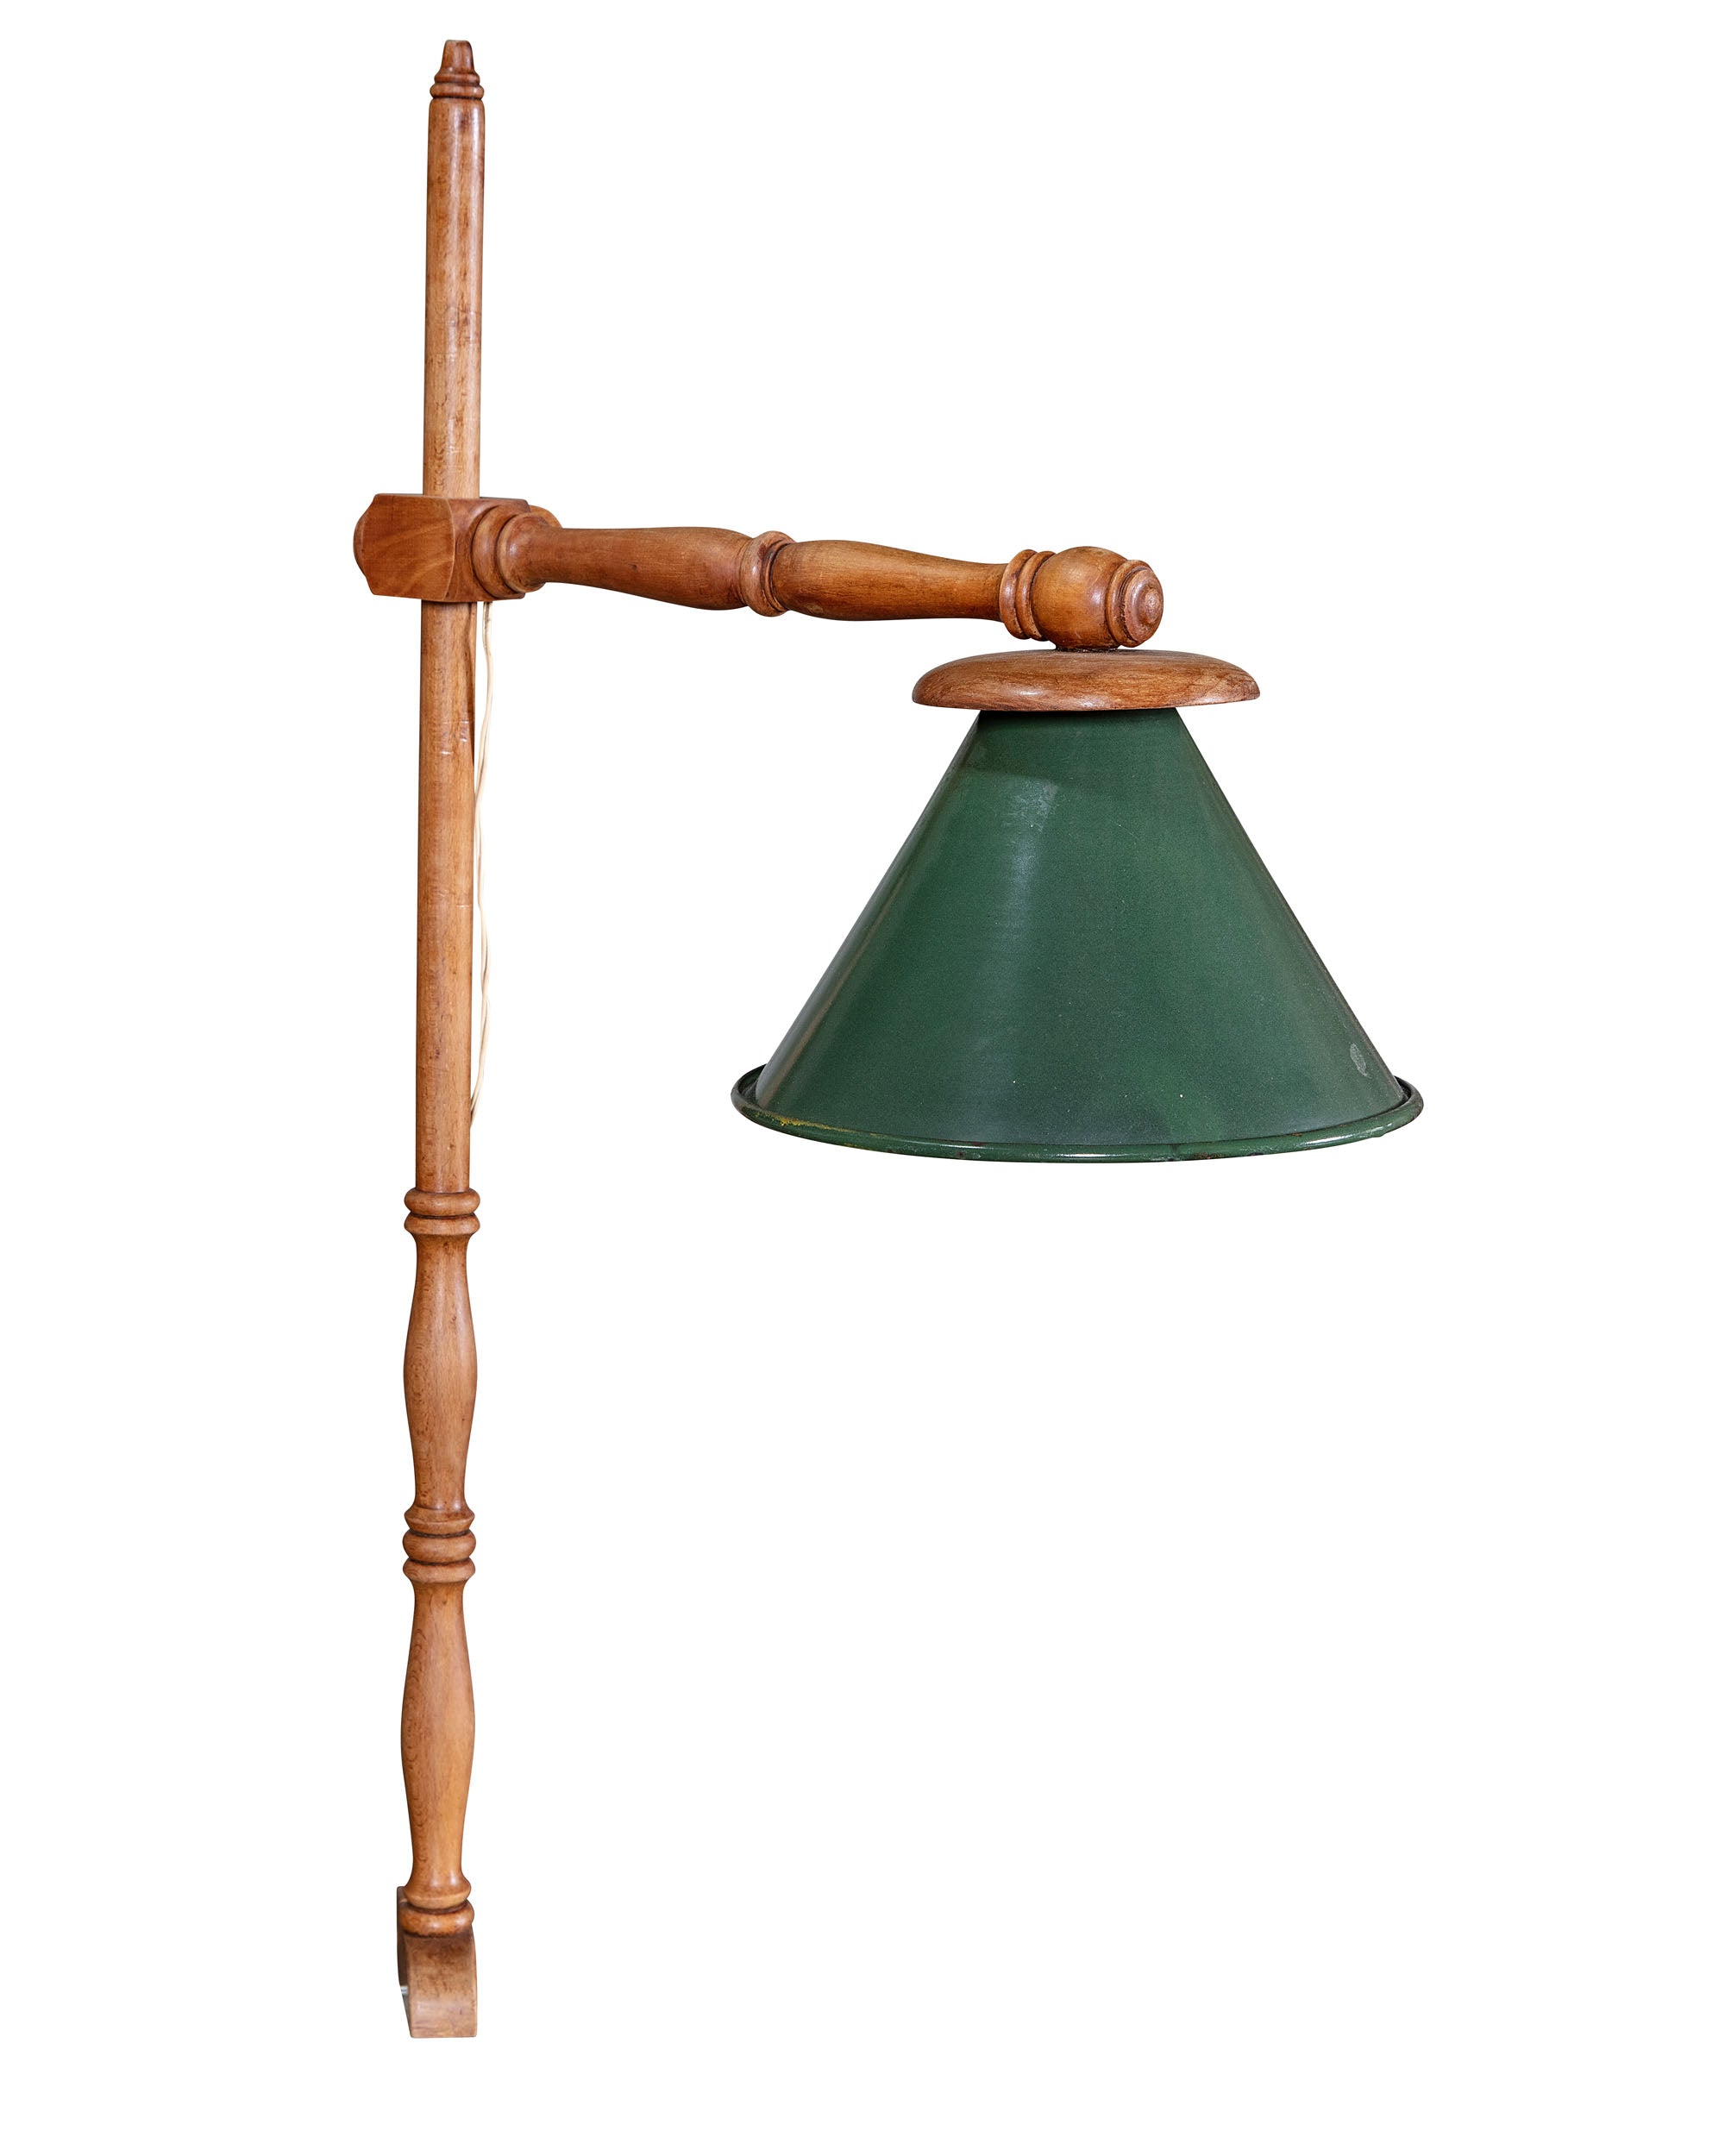 Wooden table lamp with clamp